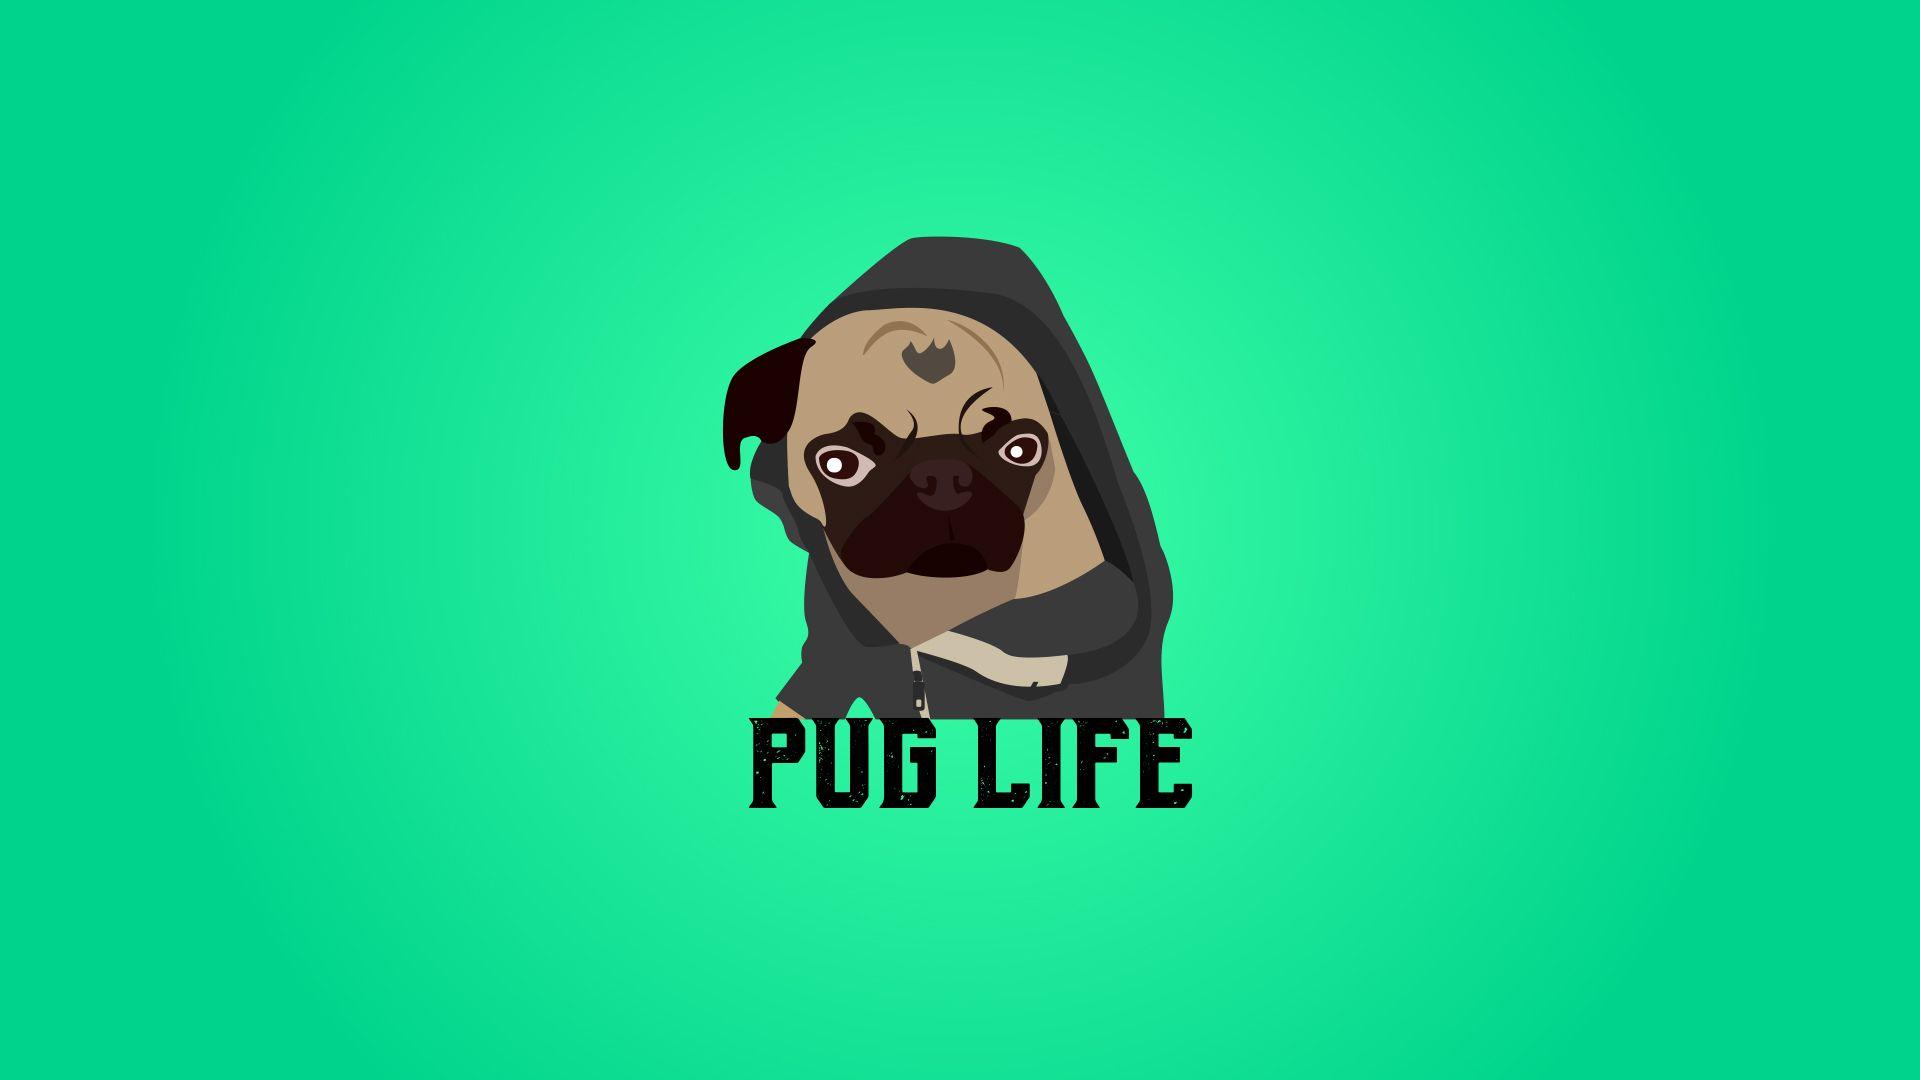 Pug Life (1920 x 1080) me for different resolutions. Pug